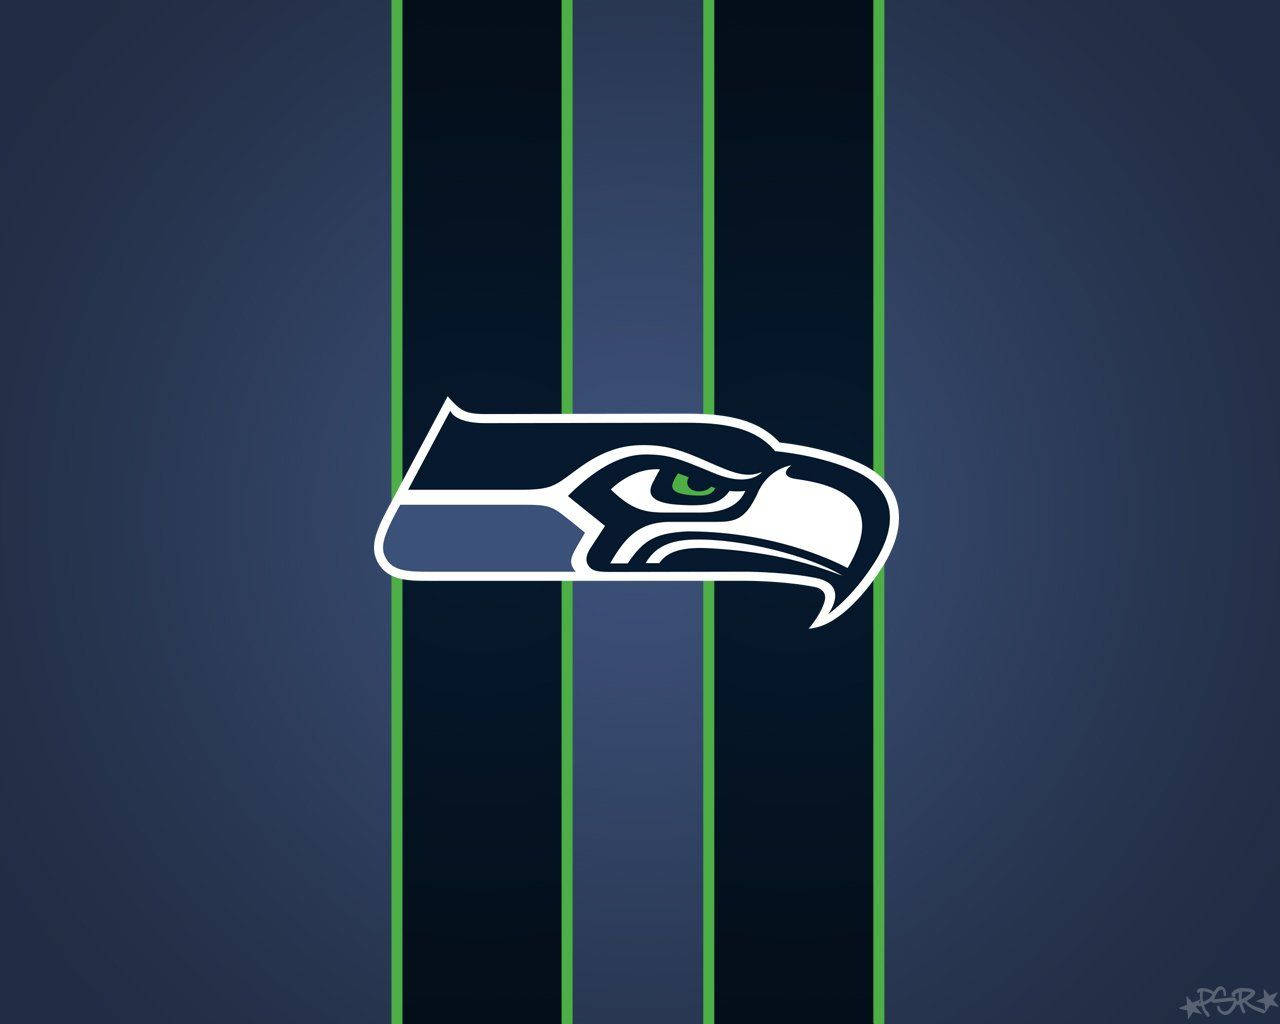 Playoff Bound- Seattle Seahawks are primed for a deep playoff run Wallpaper